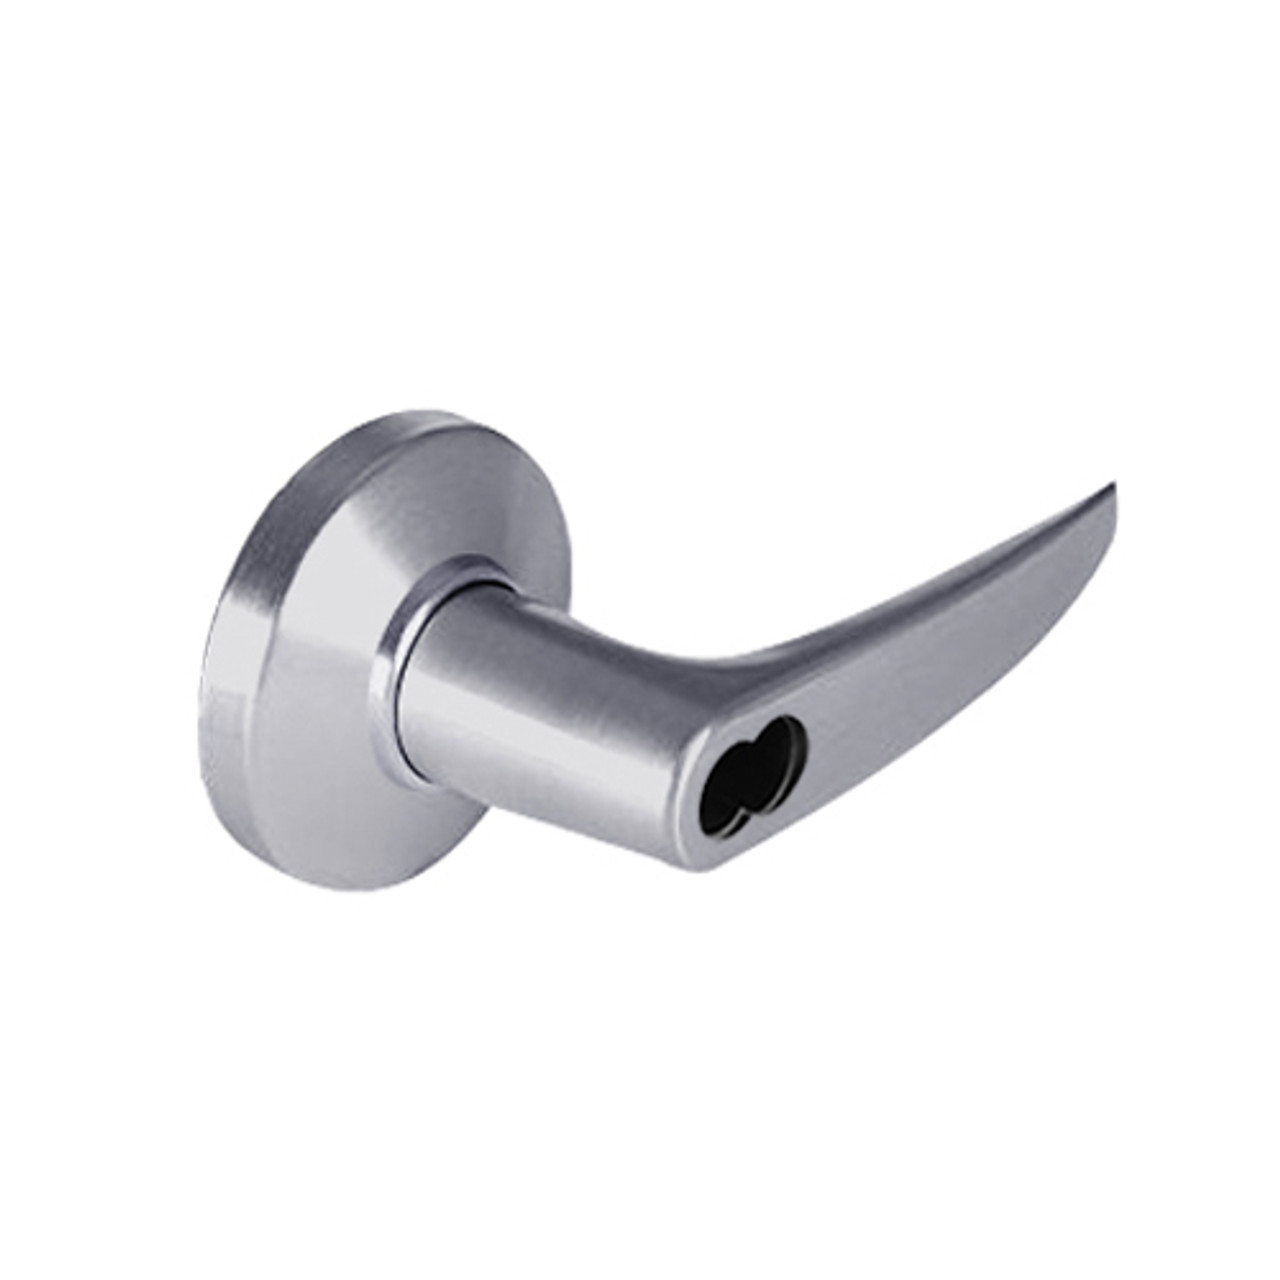 9K37YR16CS3626 Best 9K Series Special Function Cylindrical Lever Locks with Curved without Return Lever Design Accept 7 Pin Best Core in Satin Chrome